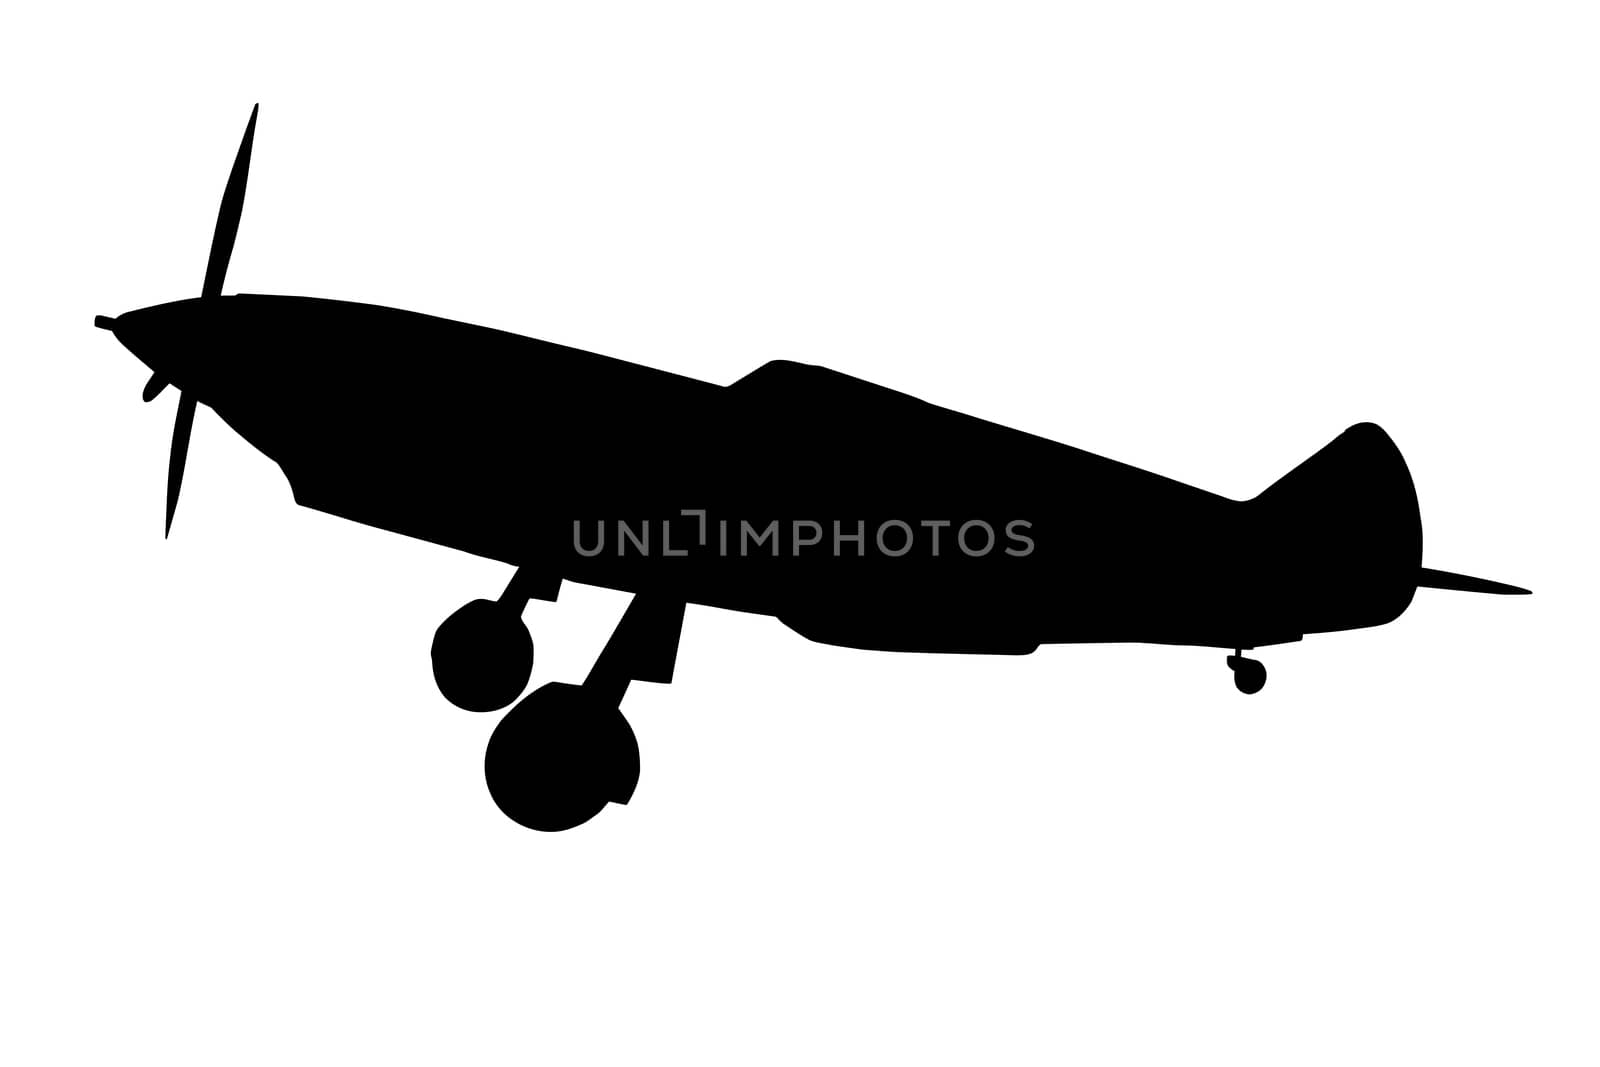  Silhouette of military plane, isolated on a white background.